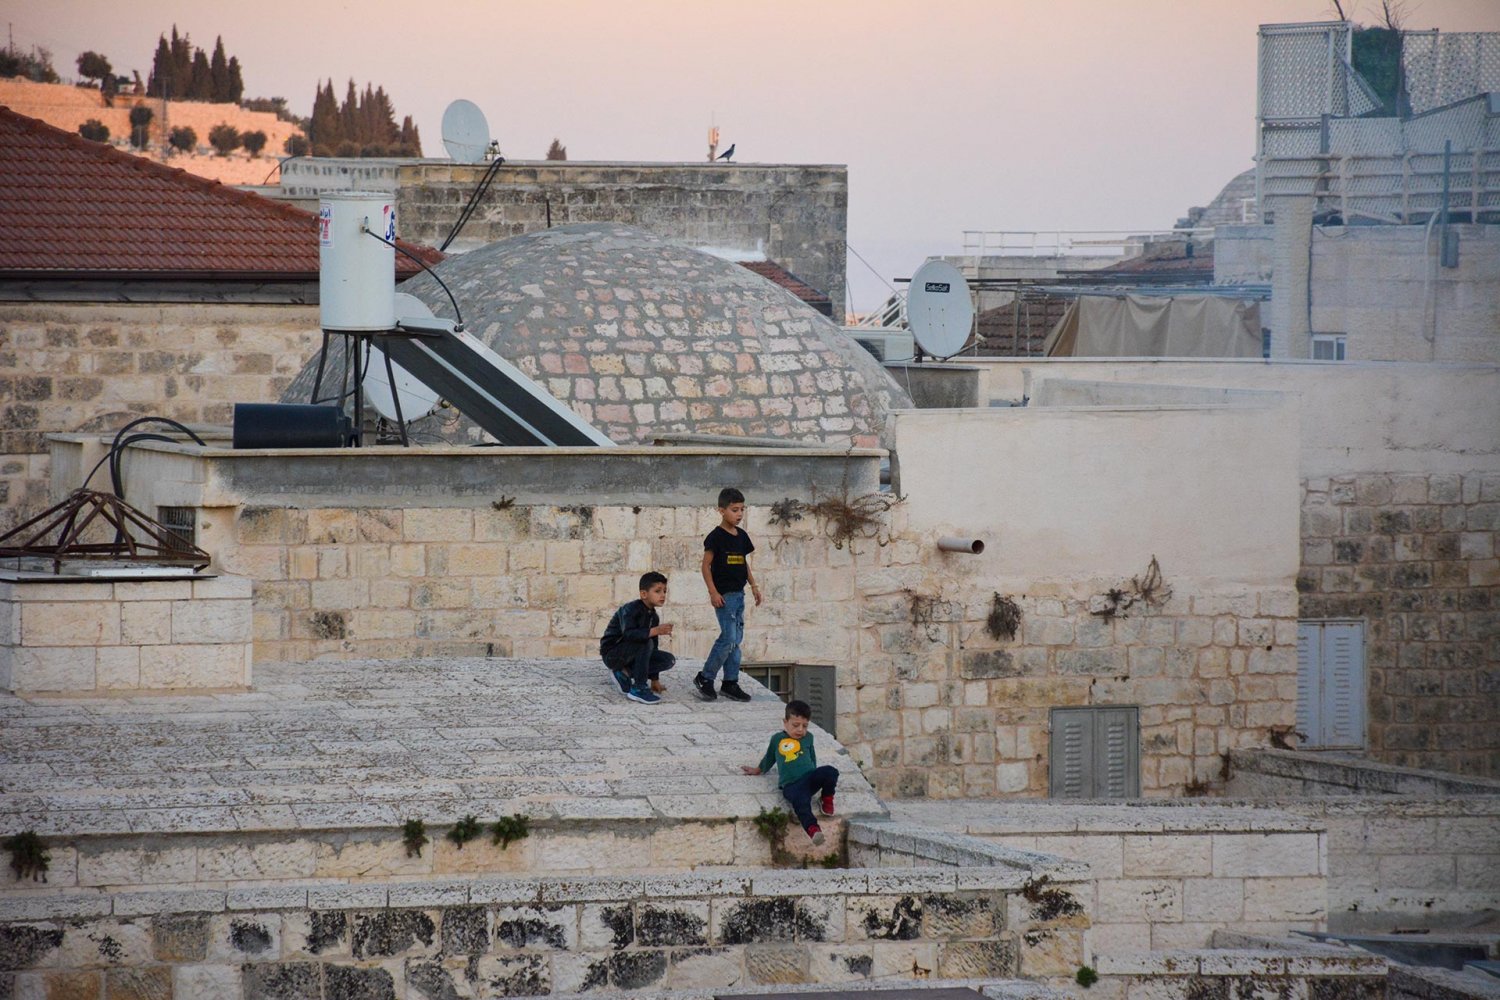 Atop the roof of Souk Khan al-Zeit in the Old City of Jerusalem, 2021